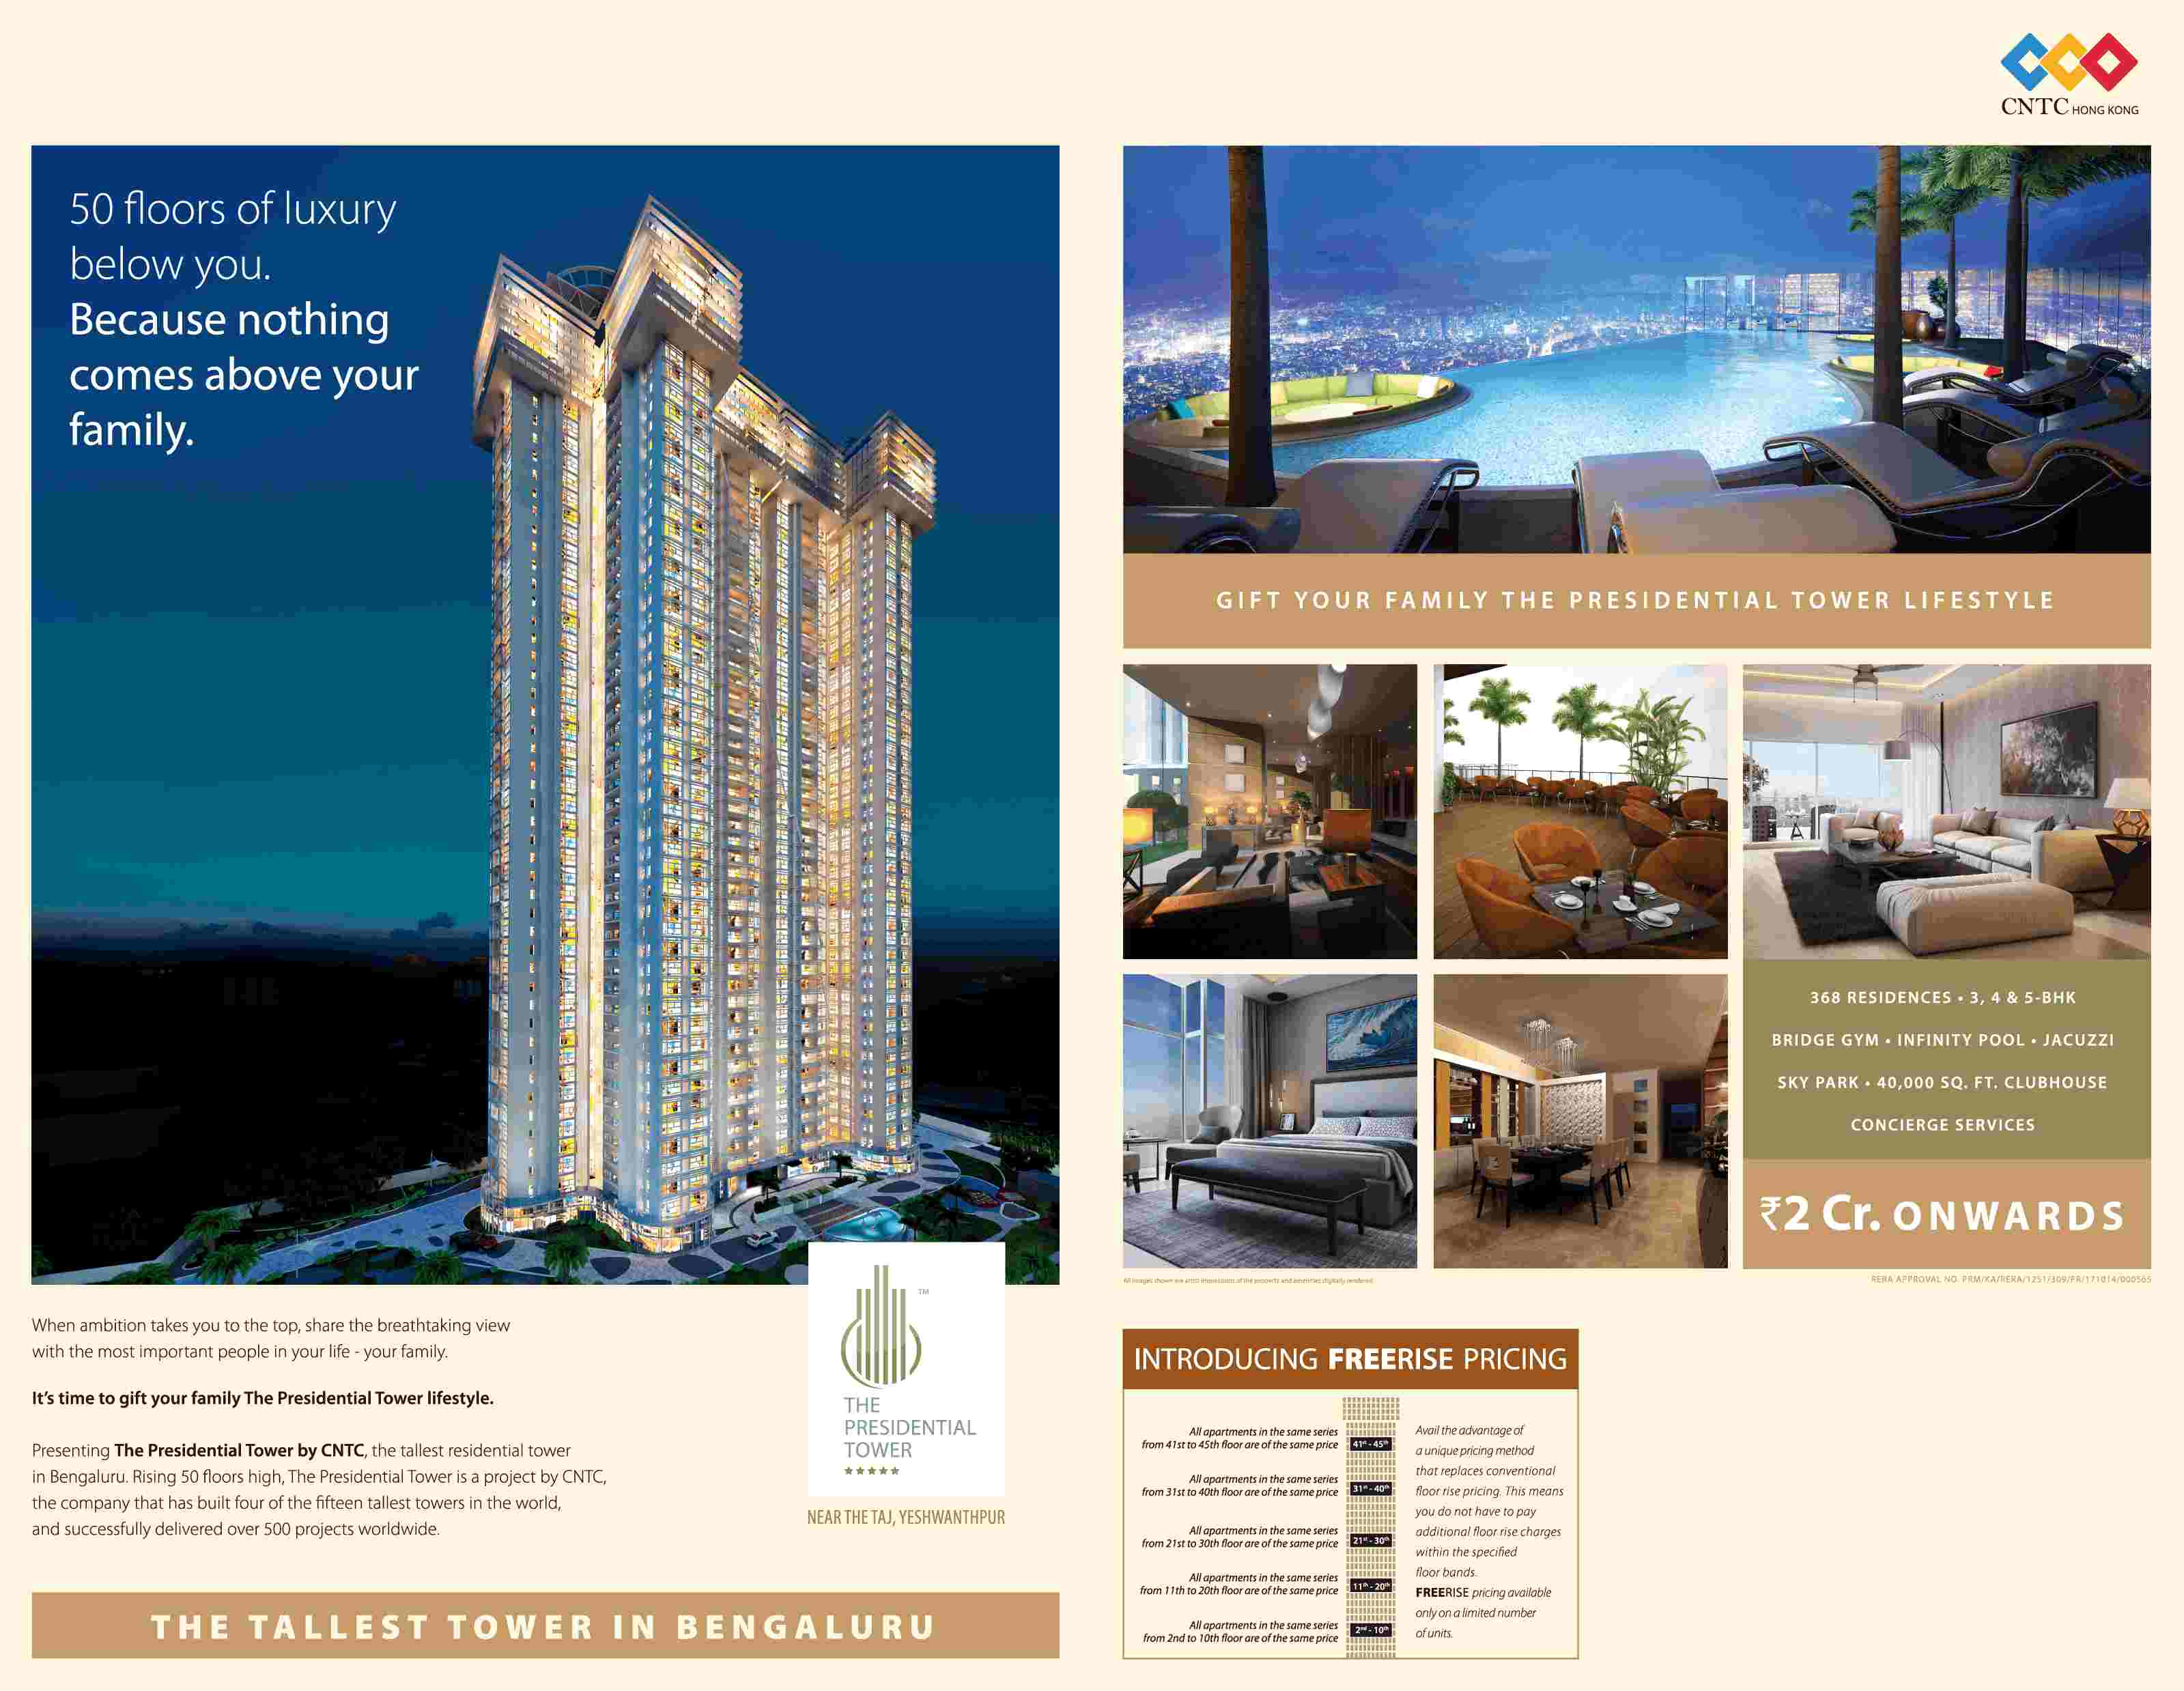 Presenting CNTC The Presidential Tower, tallest residential tower in Bengaluru Update